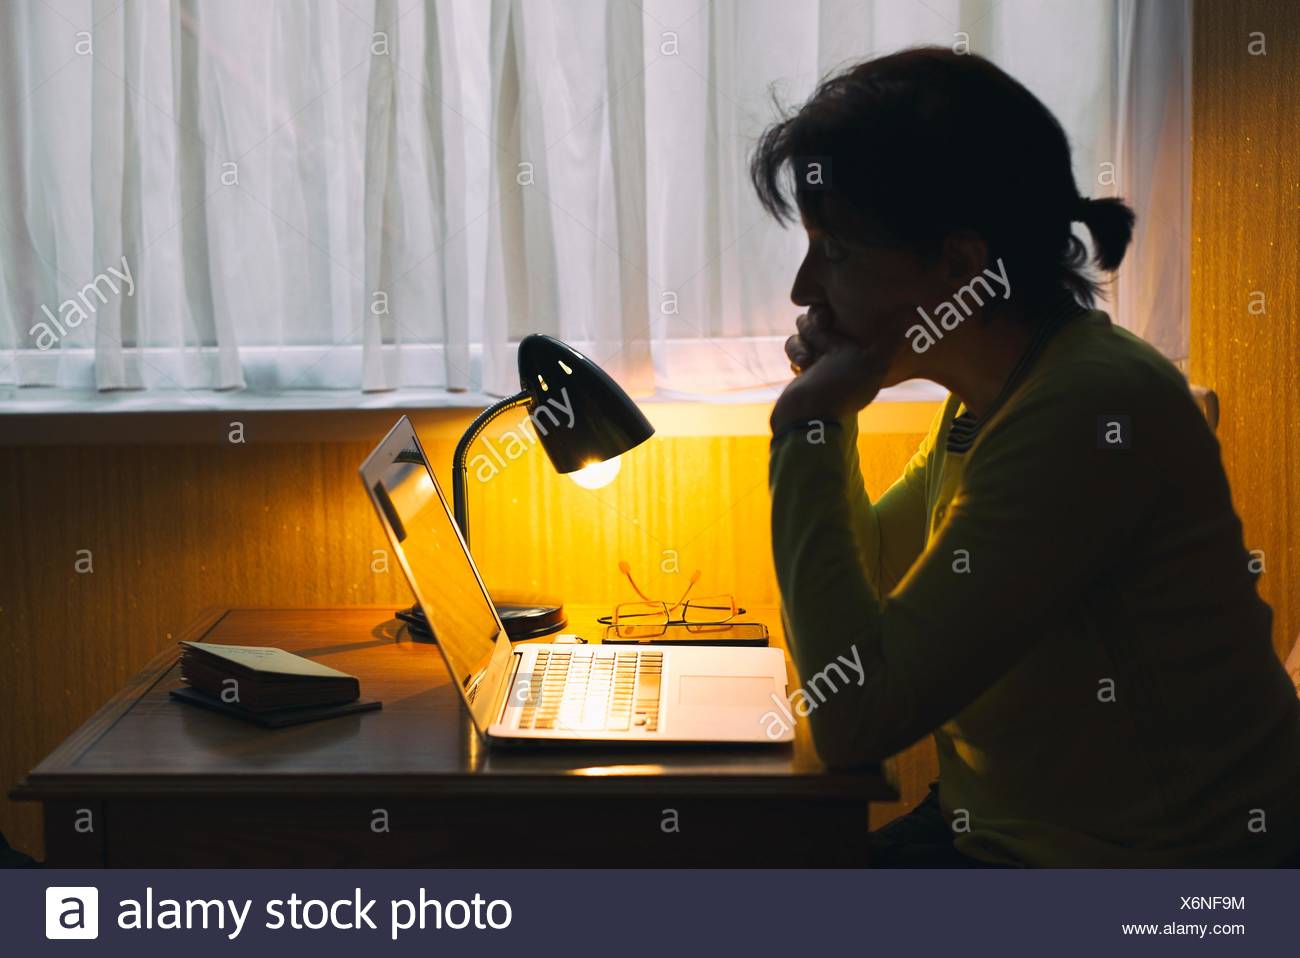 Silhouette Of A Young Woman Working With A Lap Top On A Table